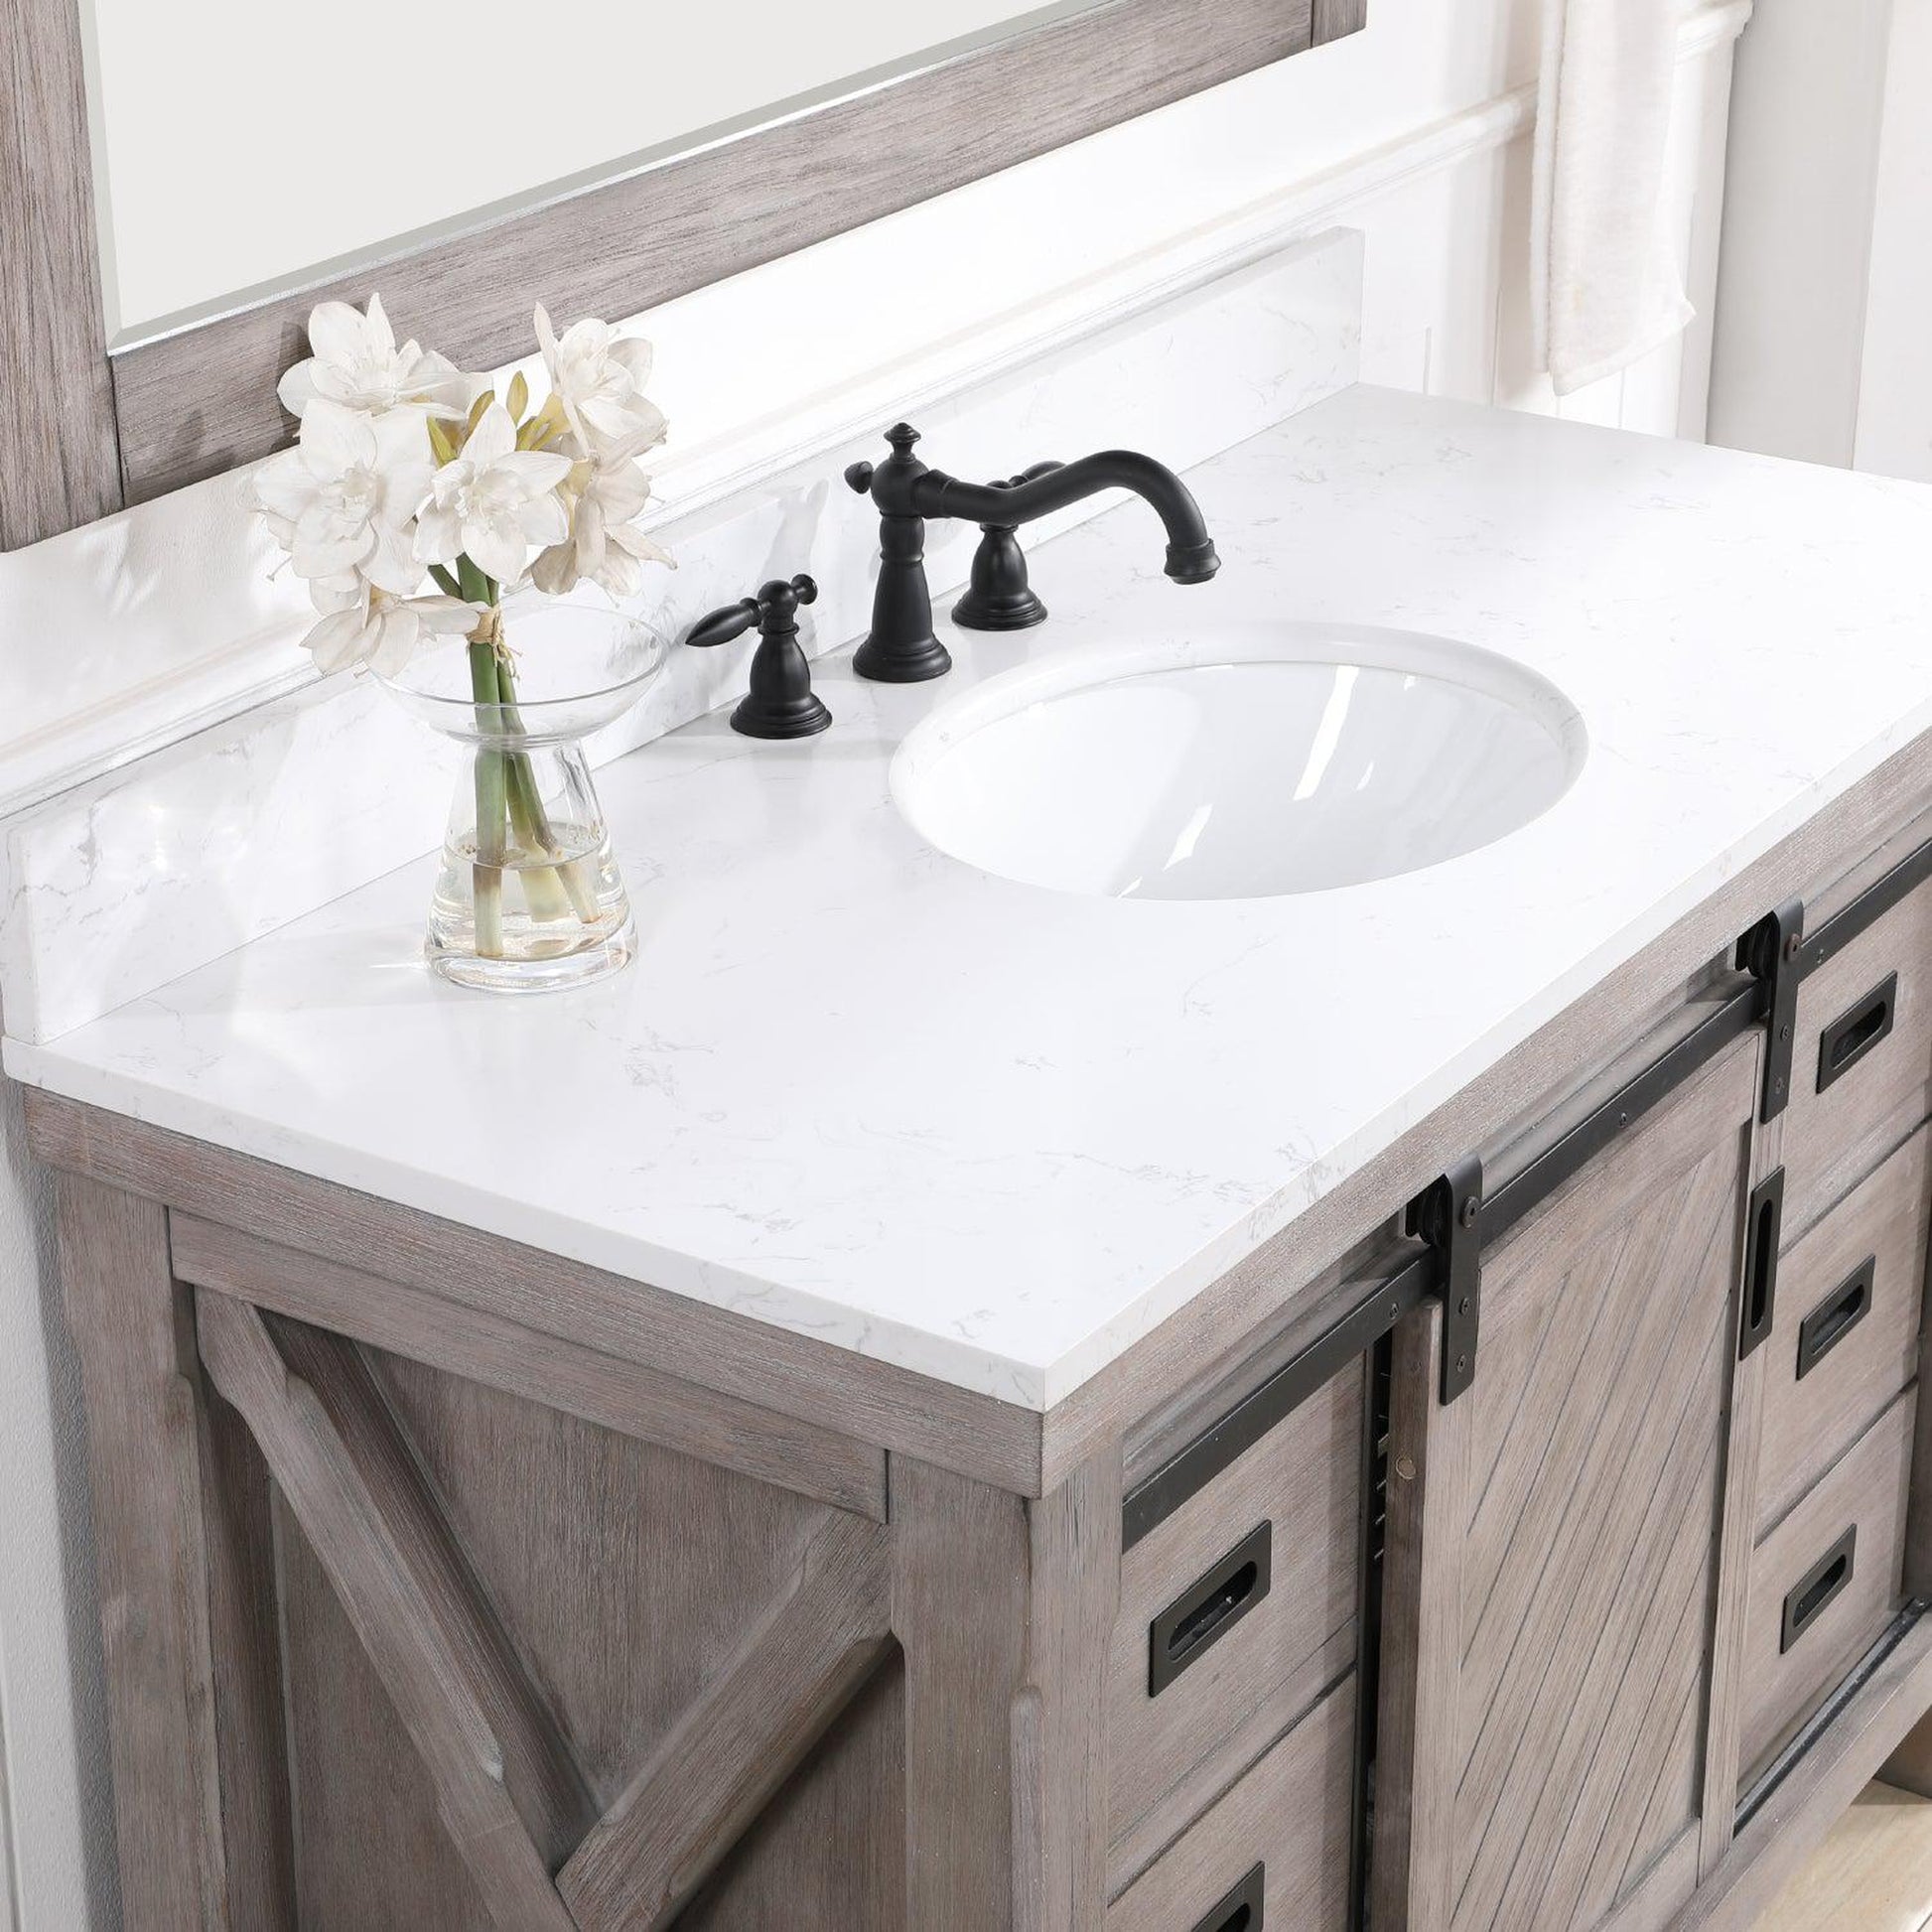 Vinnova Cortes 48" Single Sink Bath Vanity In Classical Grey Finish With White Composite Countertop And Mirror